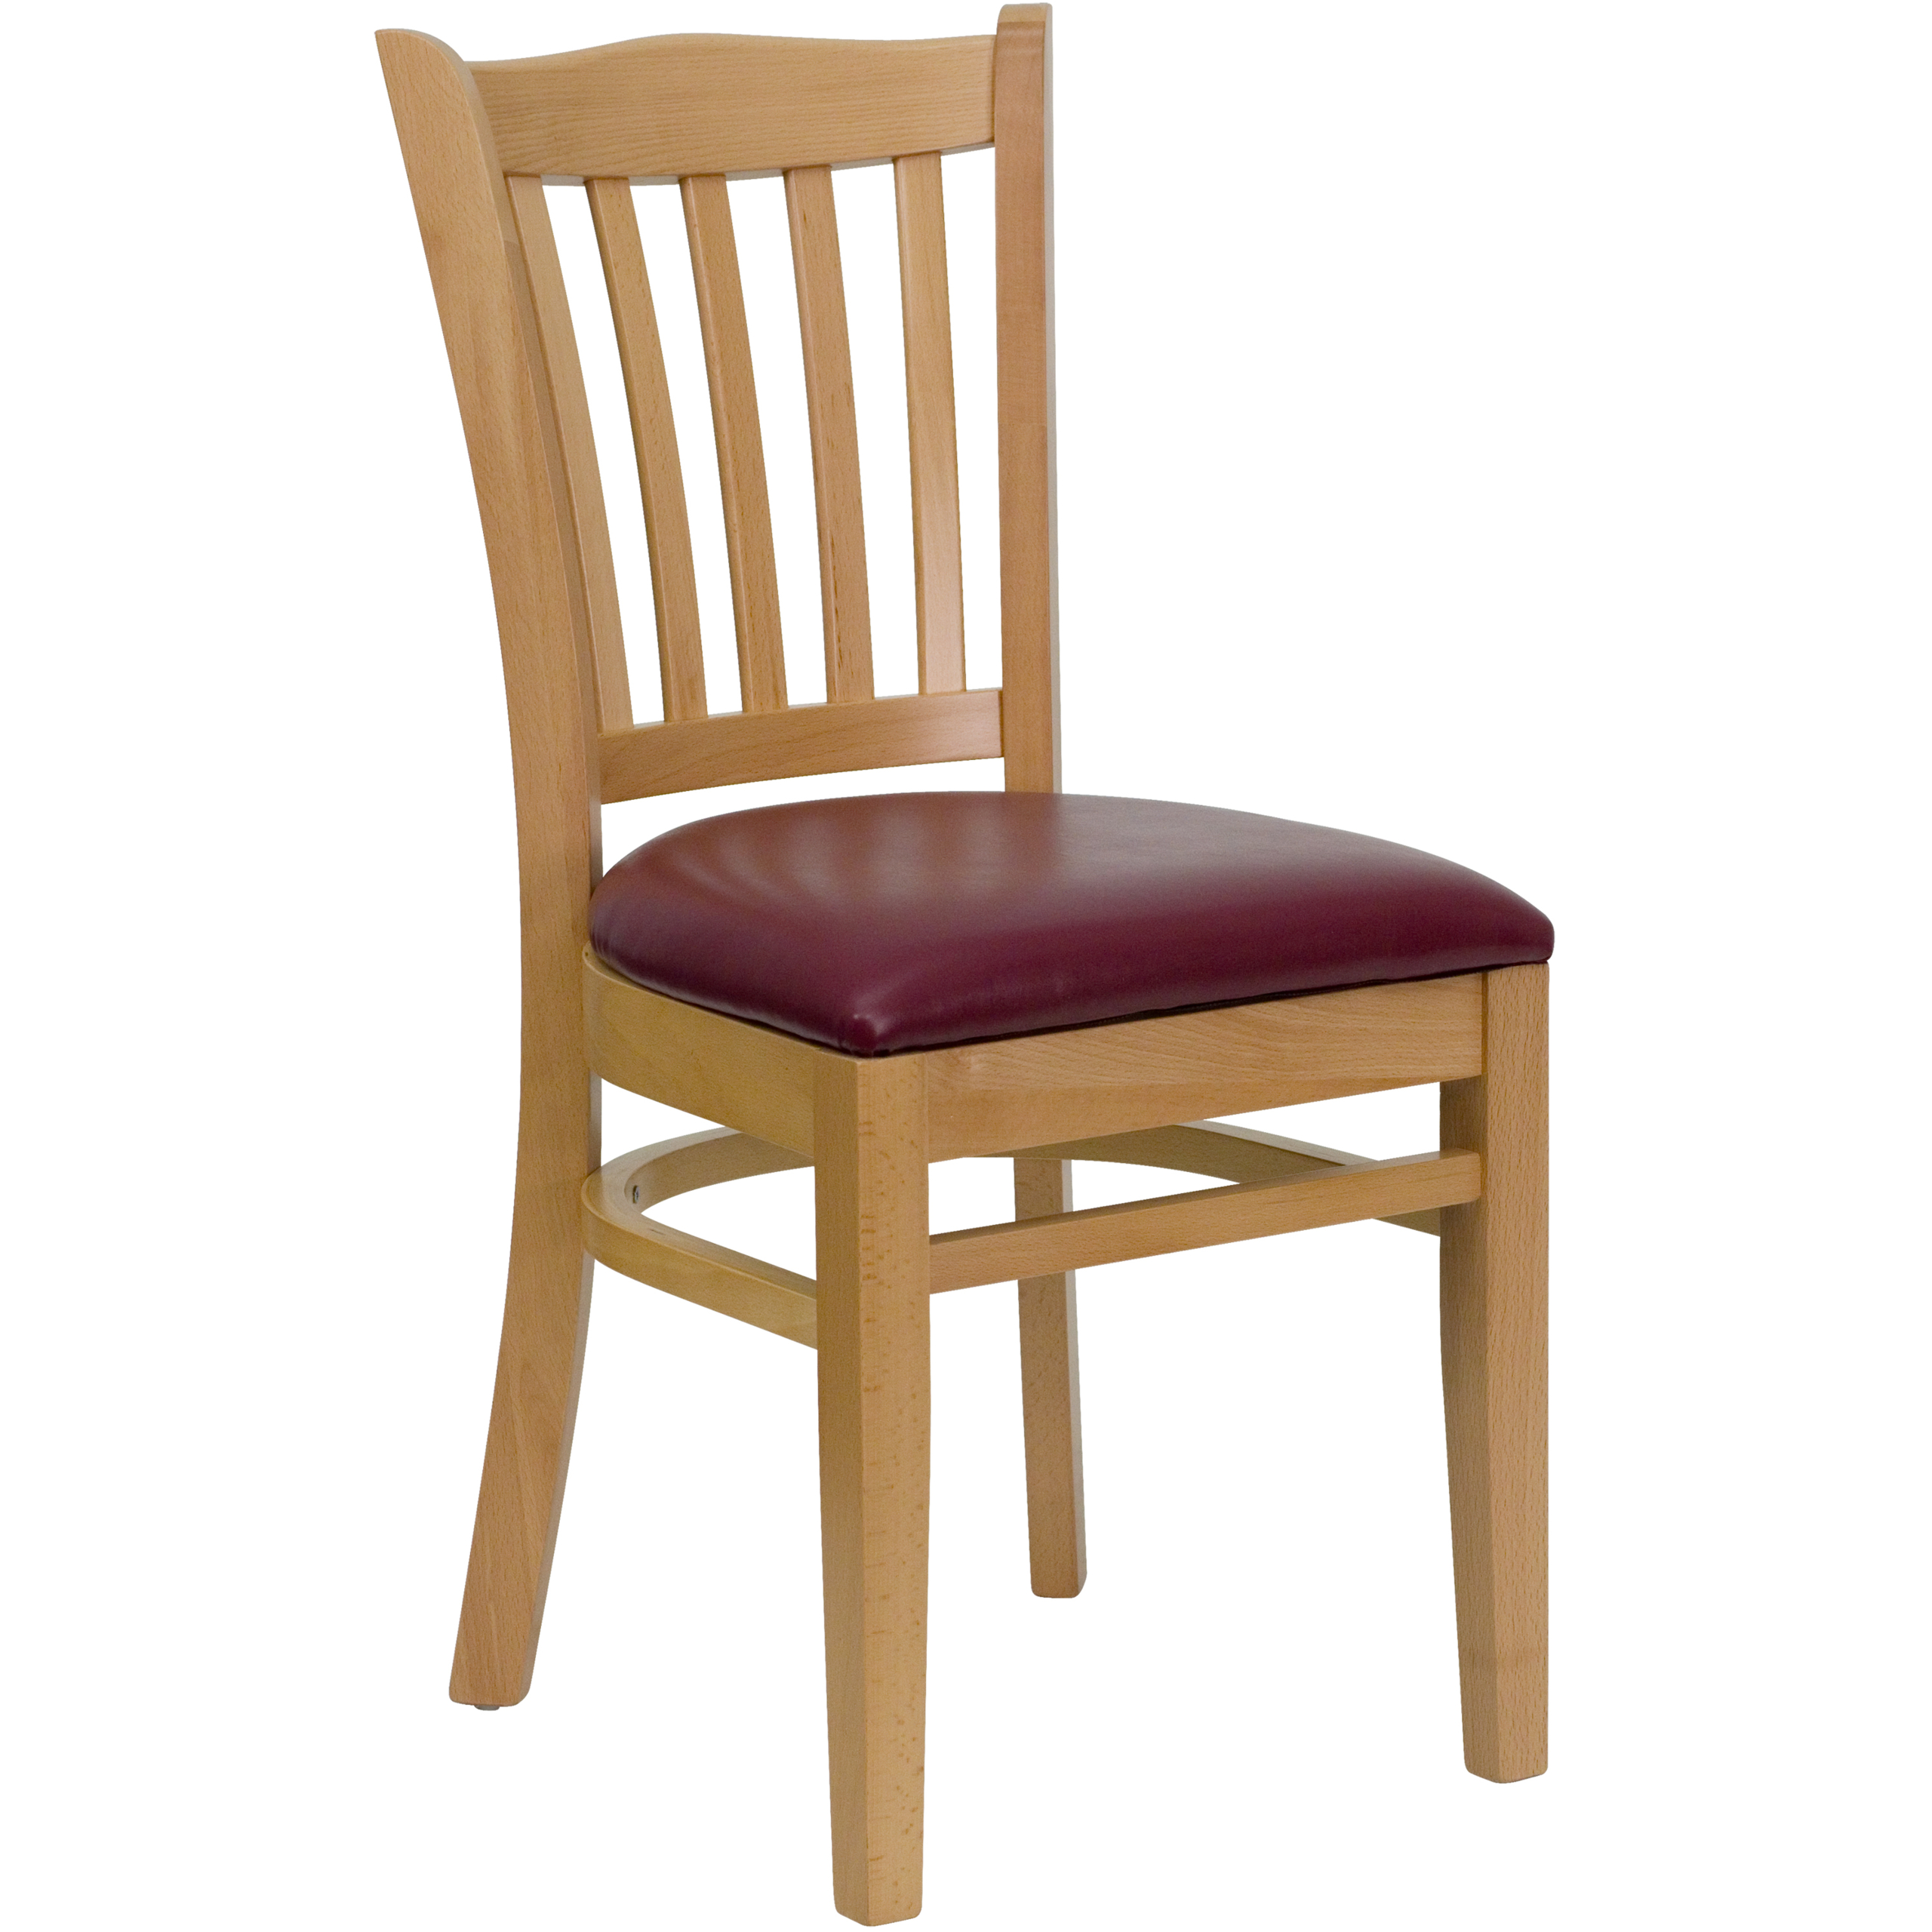 Heavy duty dining chairs 11